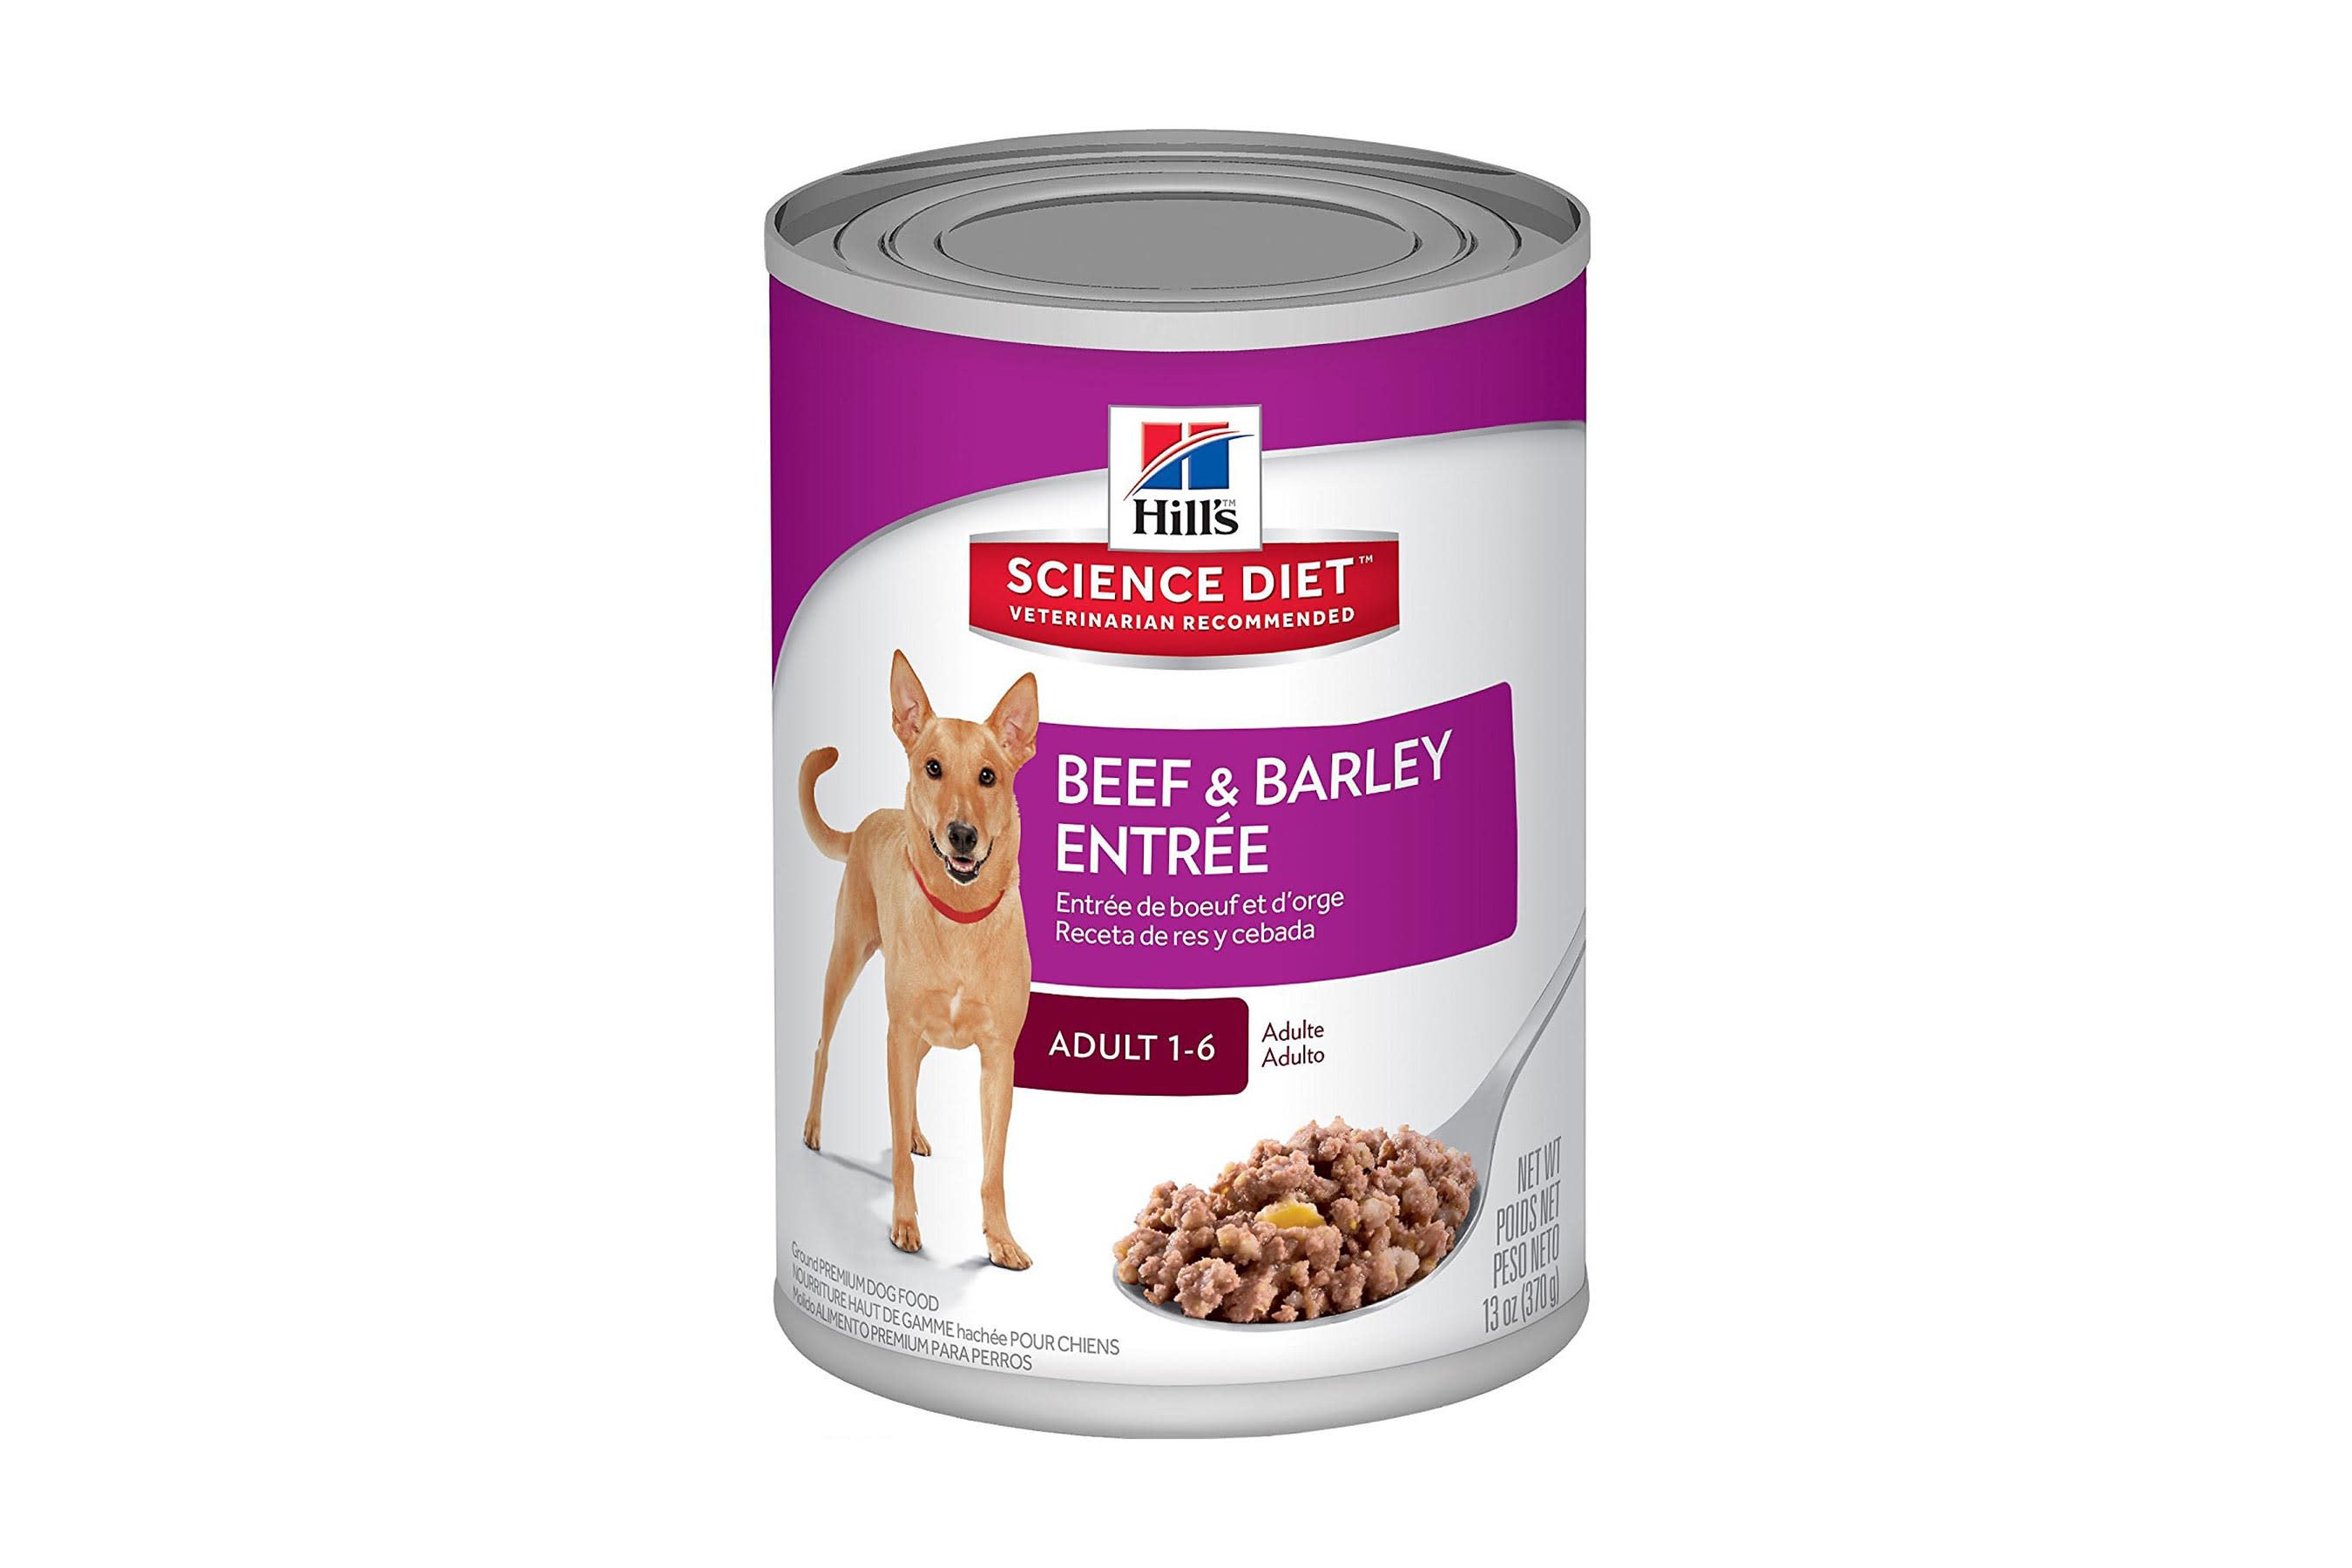 Hill's Nutrition Voluntarily Recalls Over 20 Kinds of Canned Dog Food